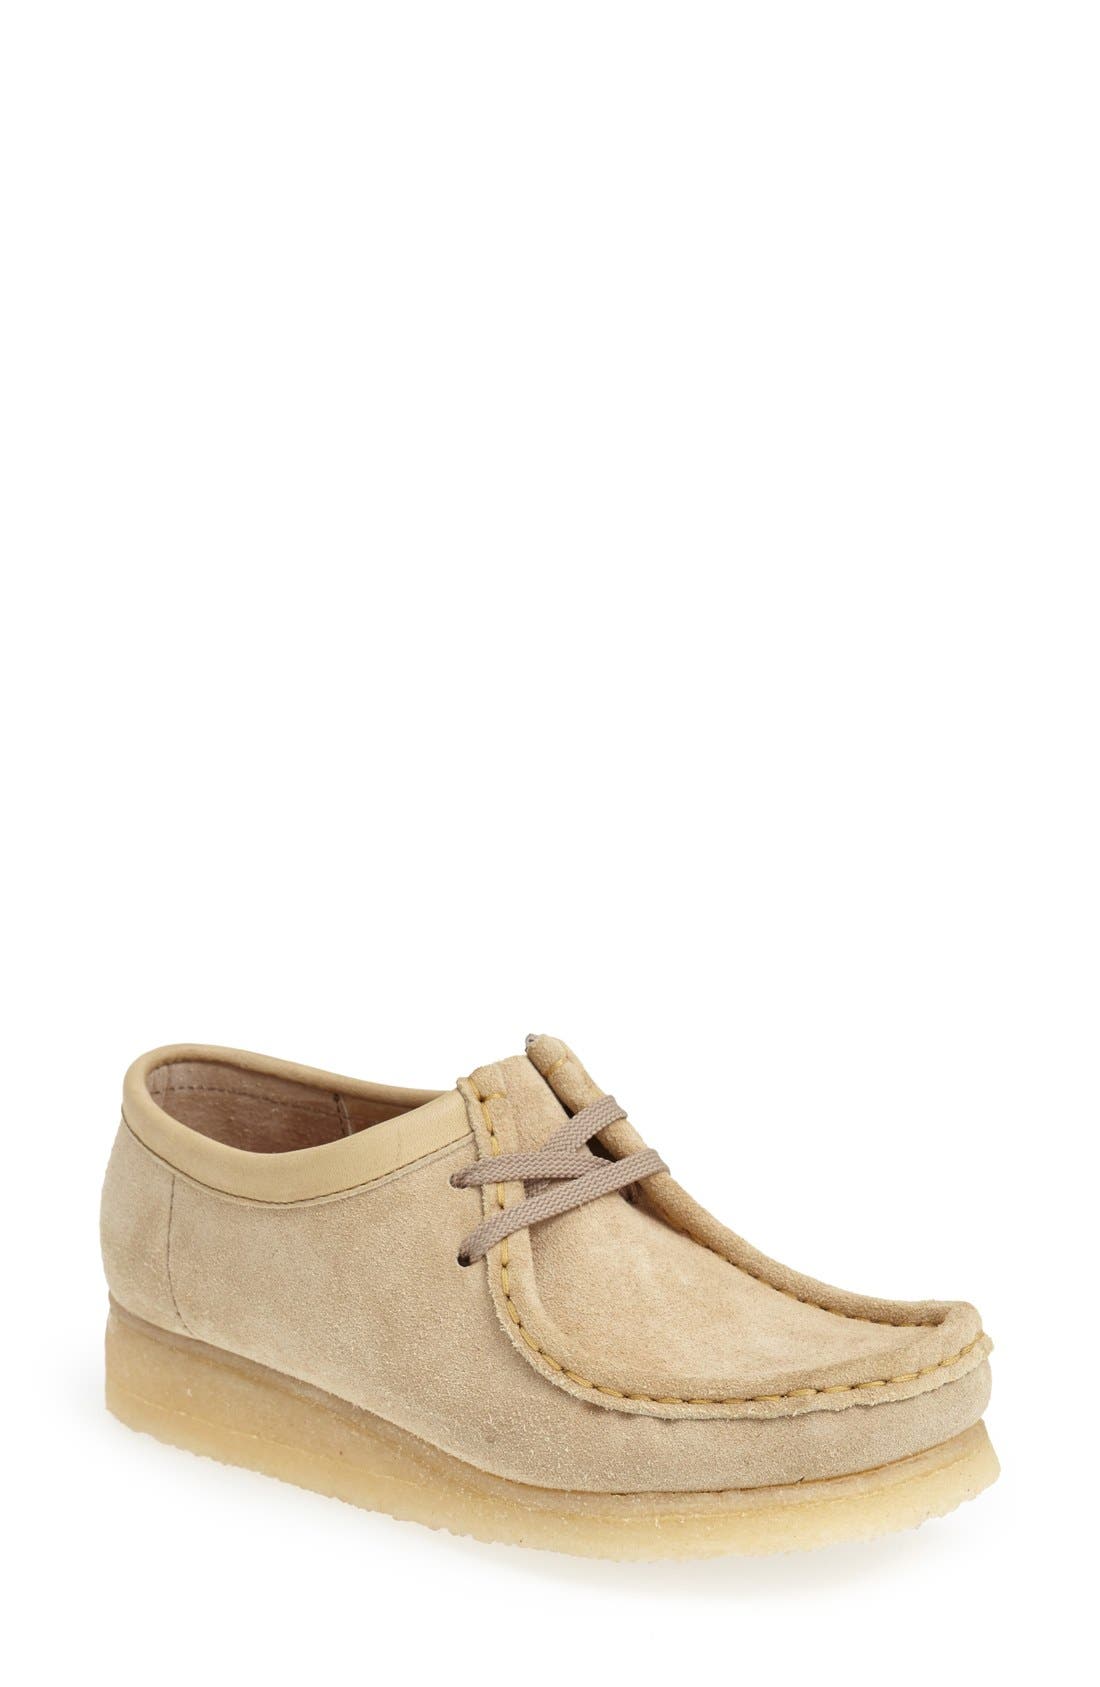 knock off wallabee shoes